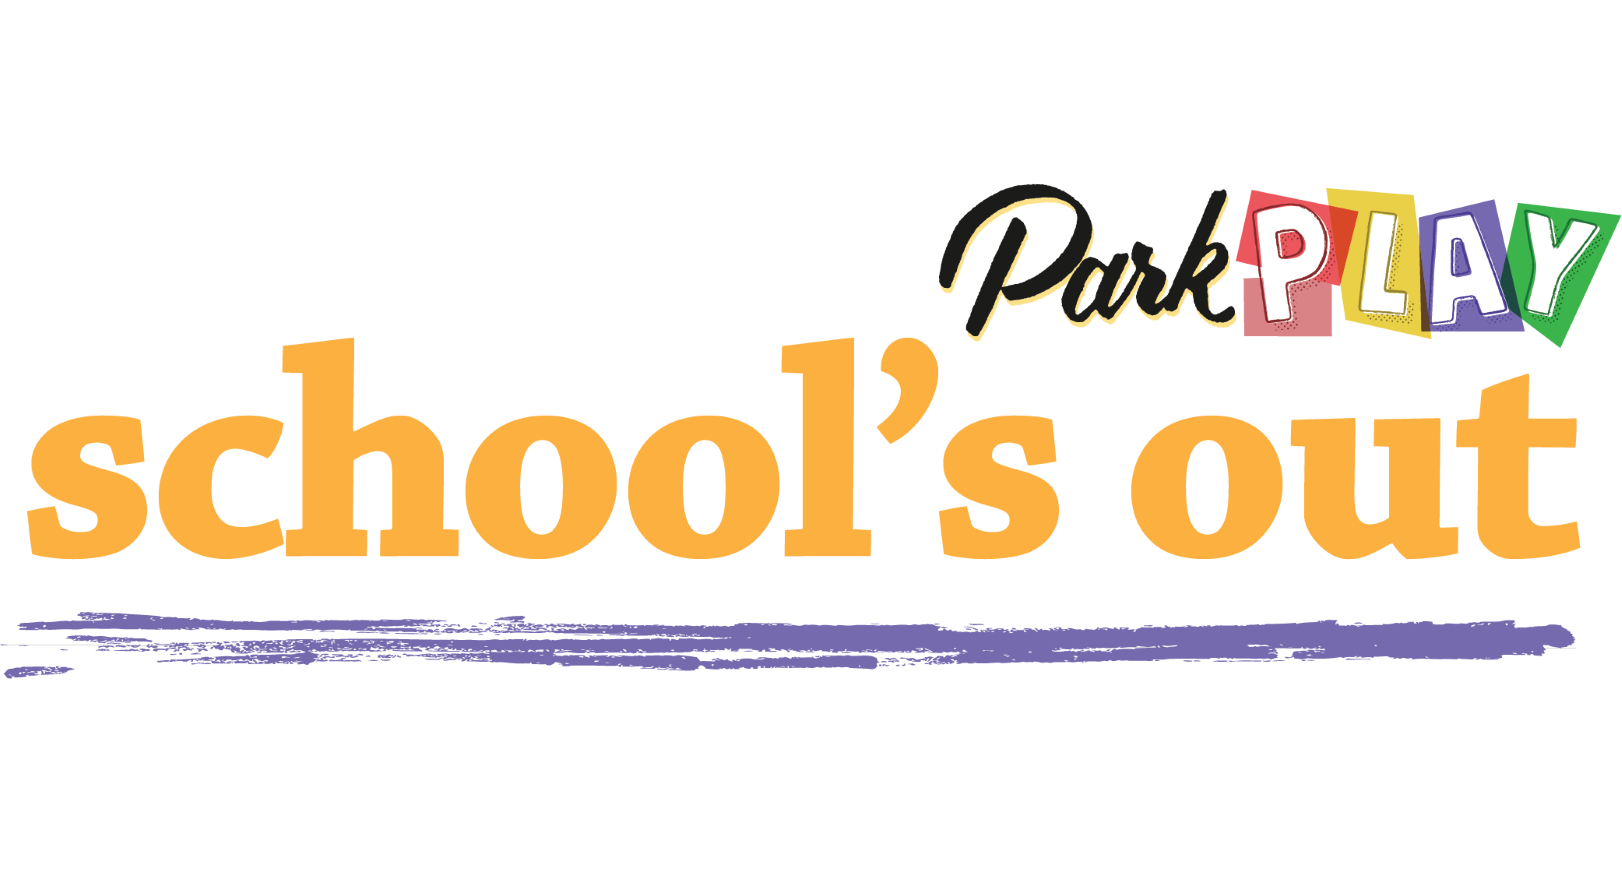 Park Play Schools Out